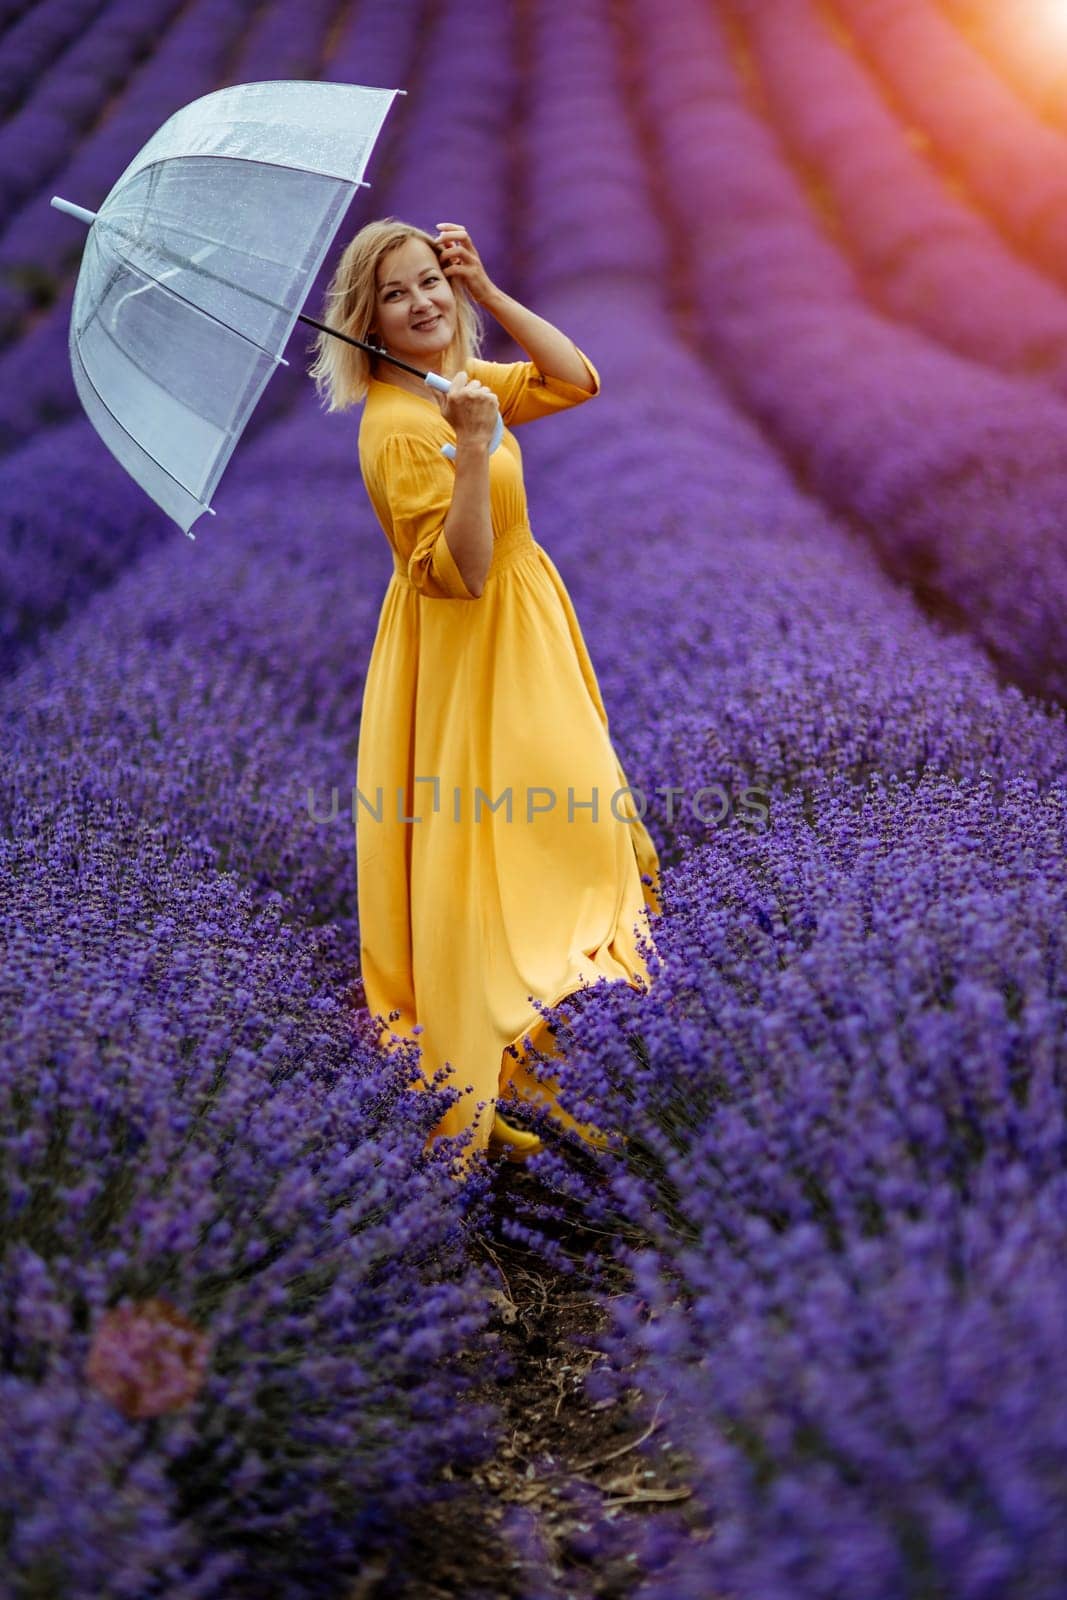 Woman lavender field. A middle-aged woman in a lavender field walks under an umbrella on a rainy day and enjoys aromatherapy. Aromatherapy concept, lavender oil, photo session in lavender by Matiunina